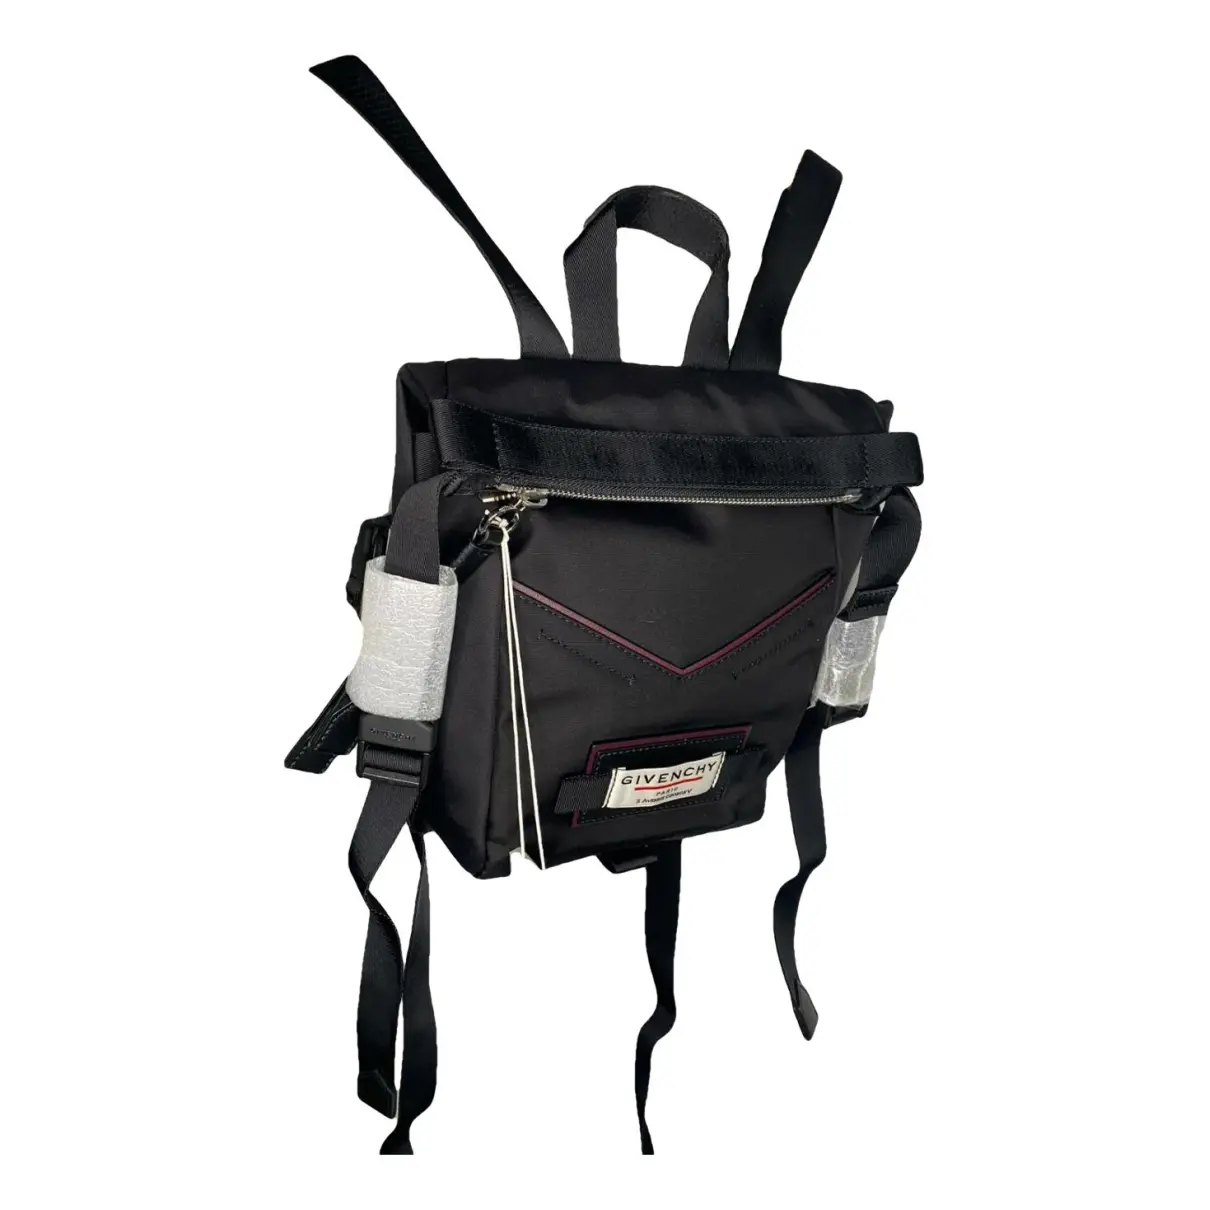 Backpack Givenchy